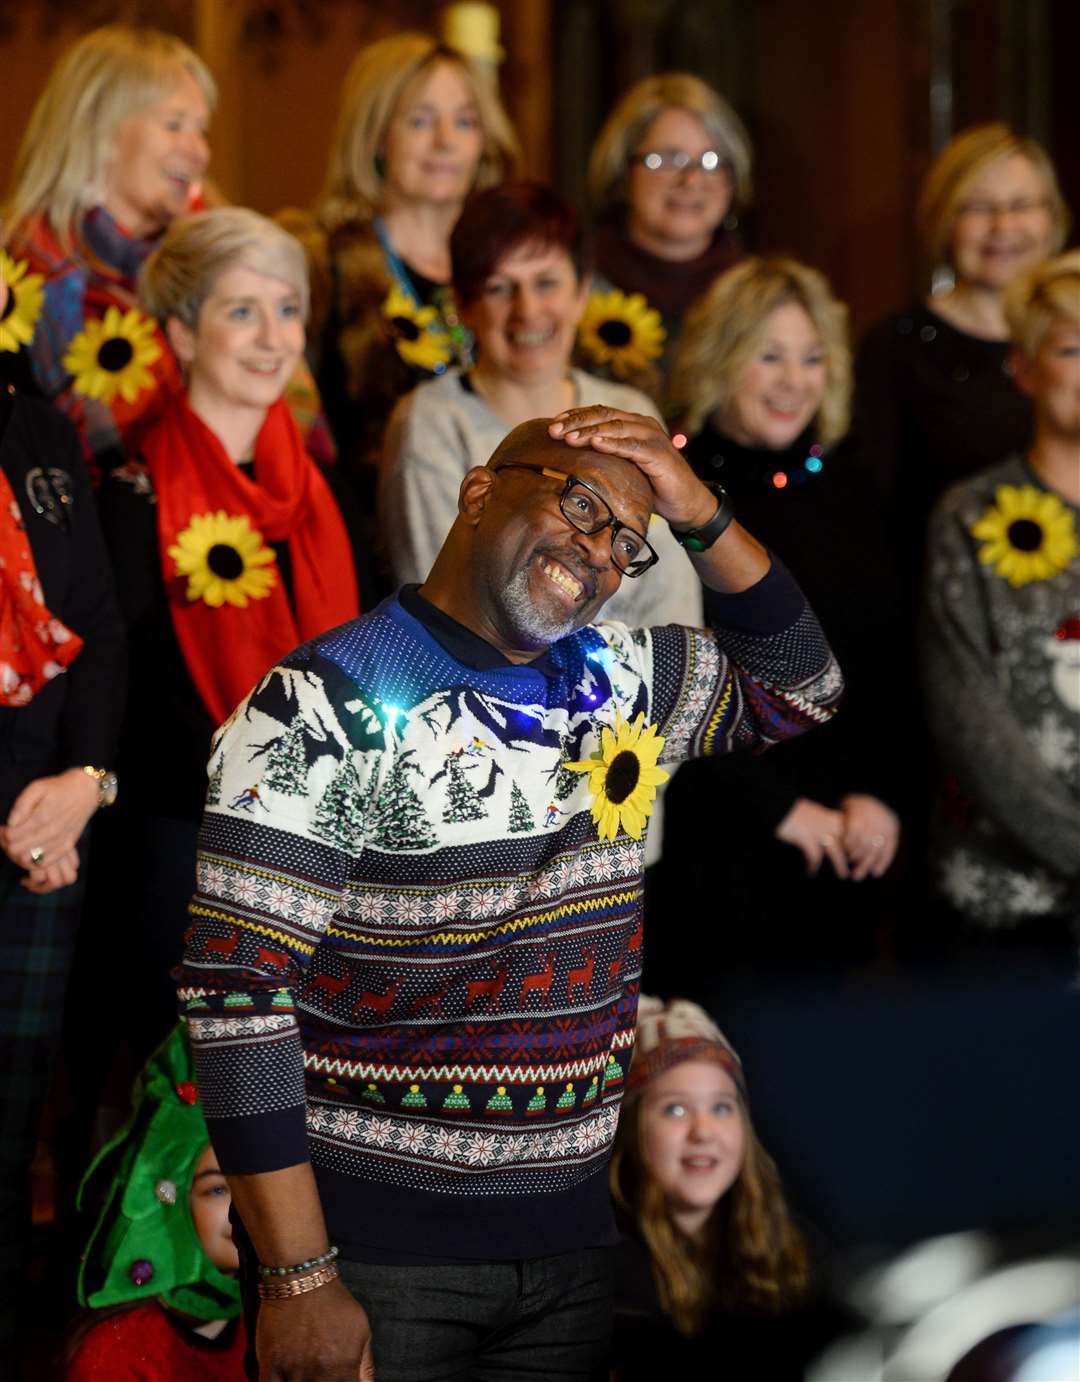 Highland Voices Gospel Choir record Christmas video at Inverness Cathedral. Picture: Gary Anthony.